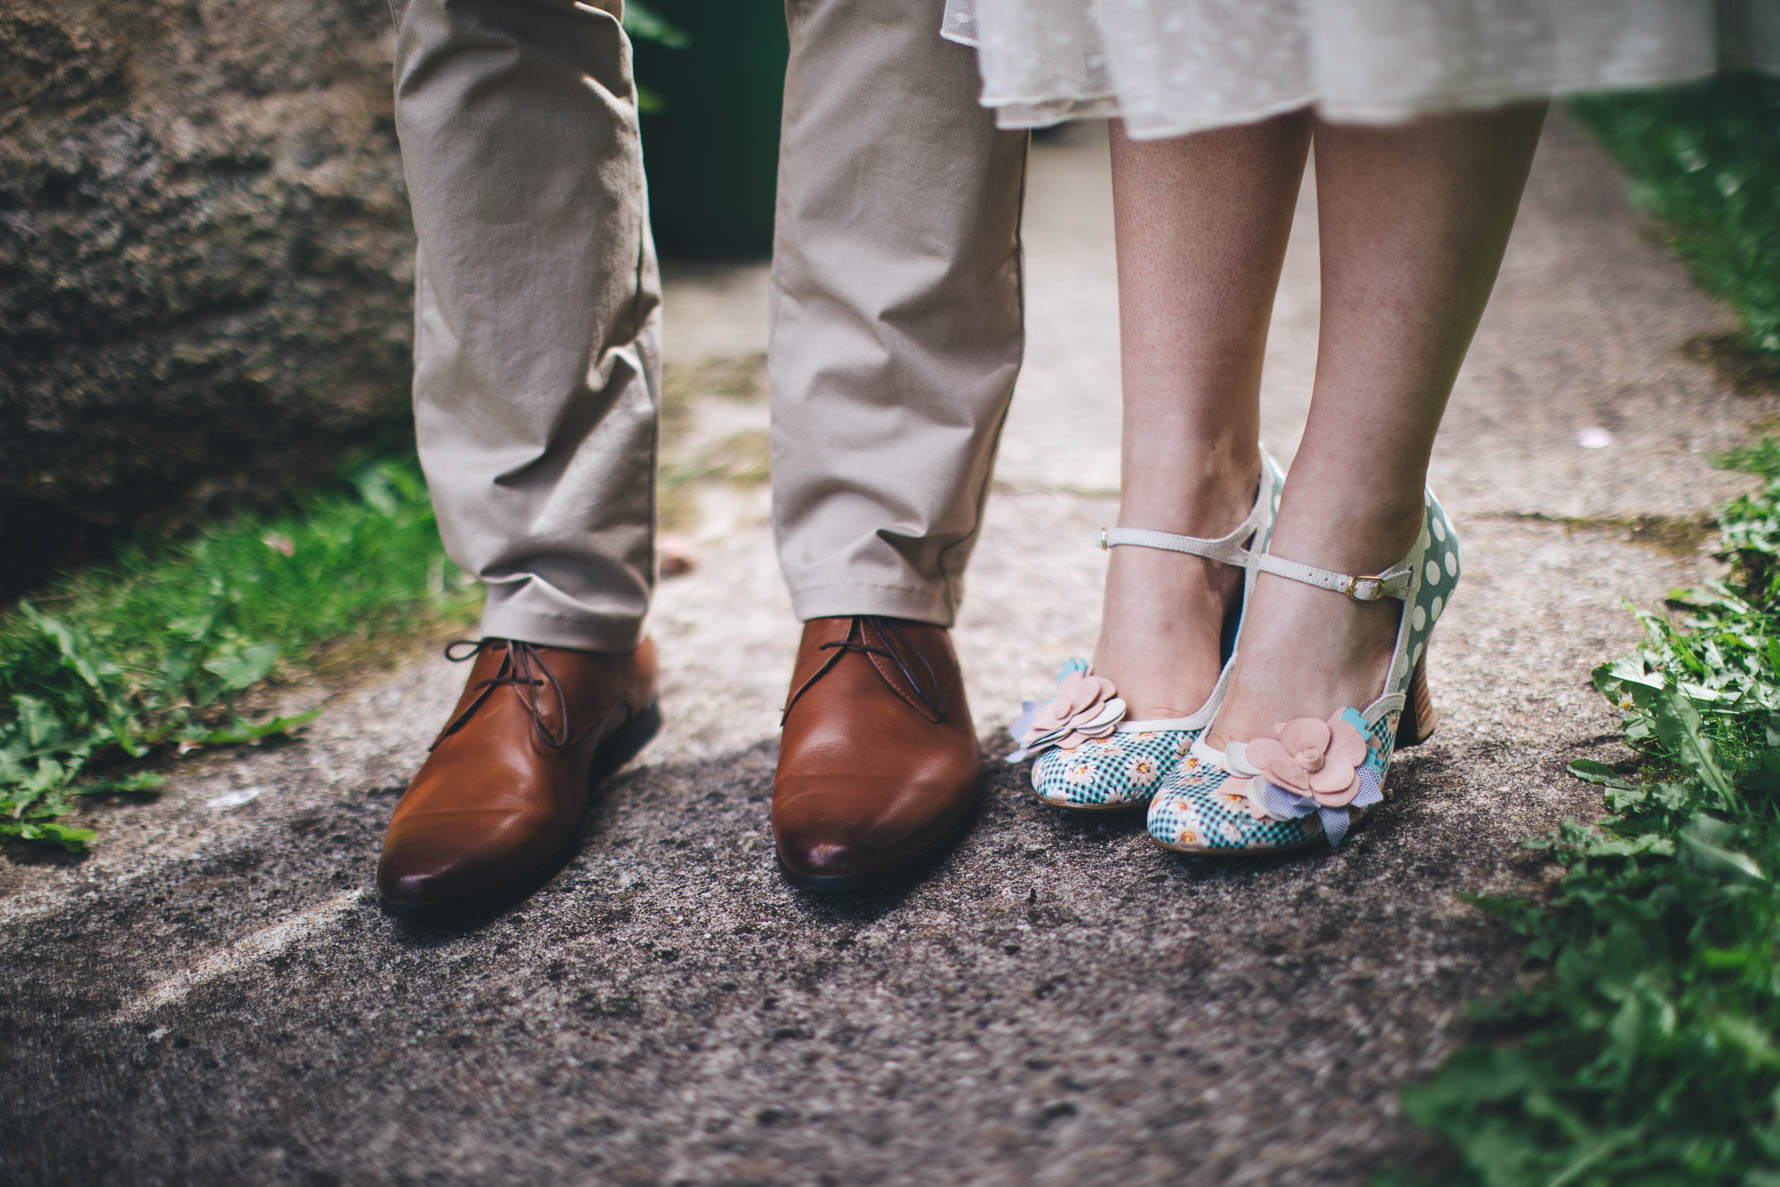 Picture of a bride and groom's shoes on a stone path. The groom is wearing cream coloured chino's and brown shoes and the bride is wearing blue heels with white polkadots and a floral design with a material flower on each shoe